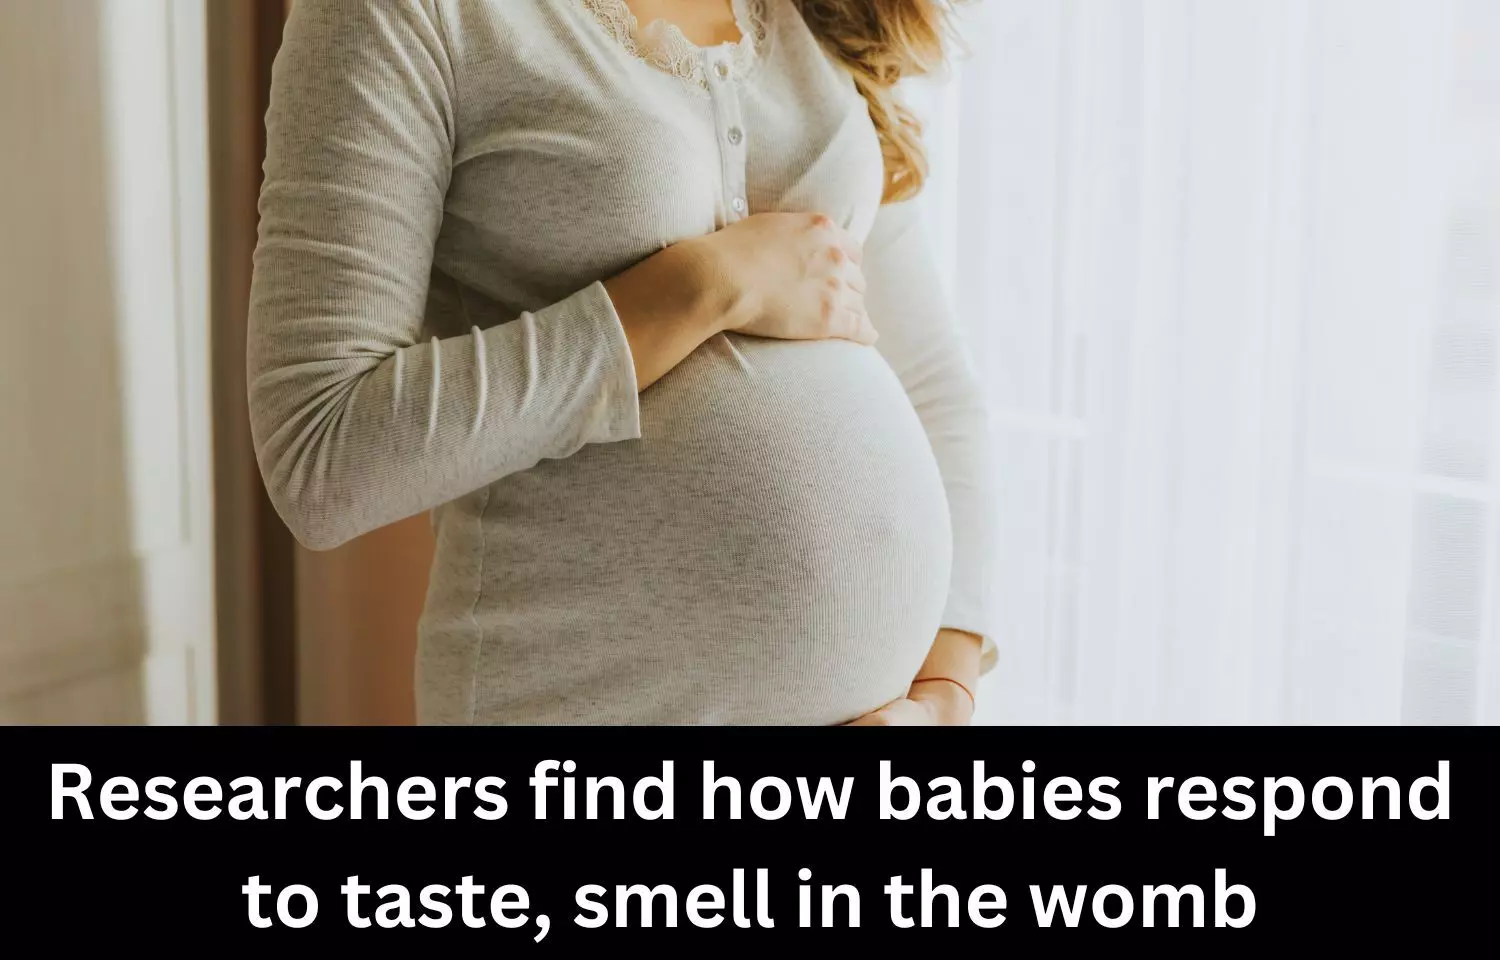 Researchers find how babies respond to taste, smell in the womb